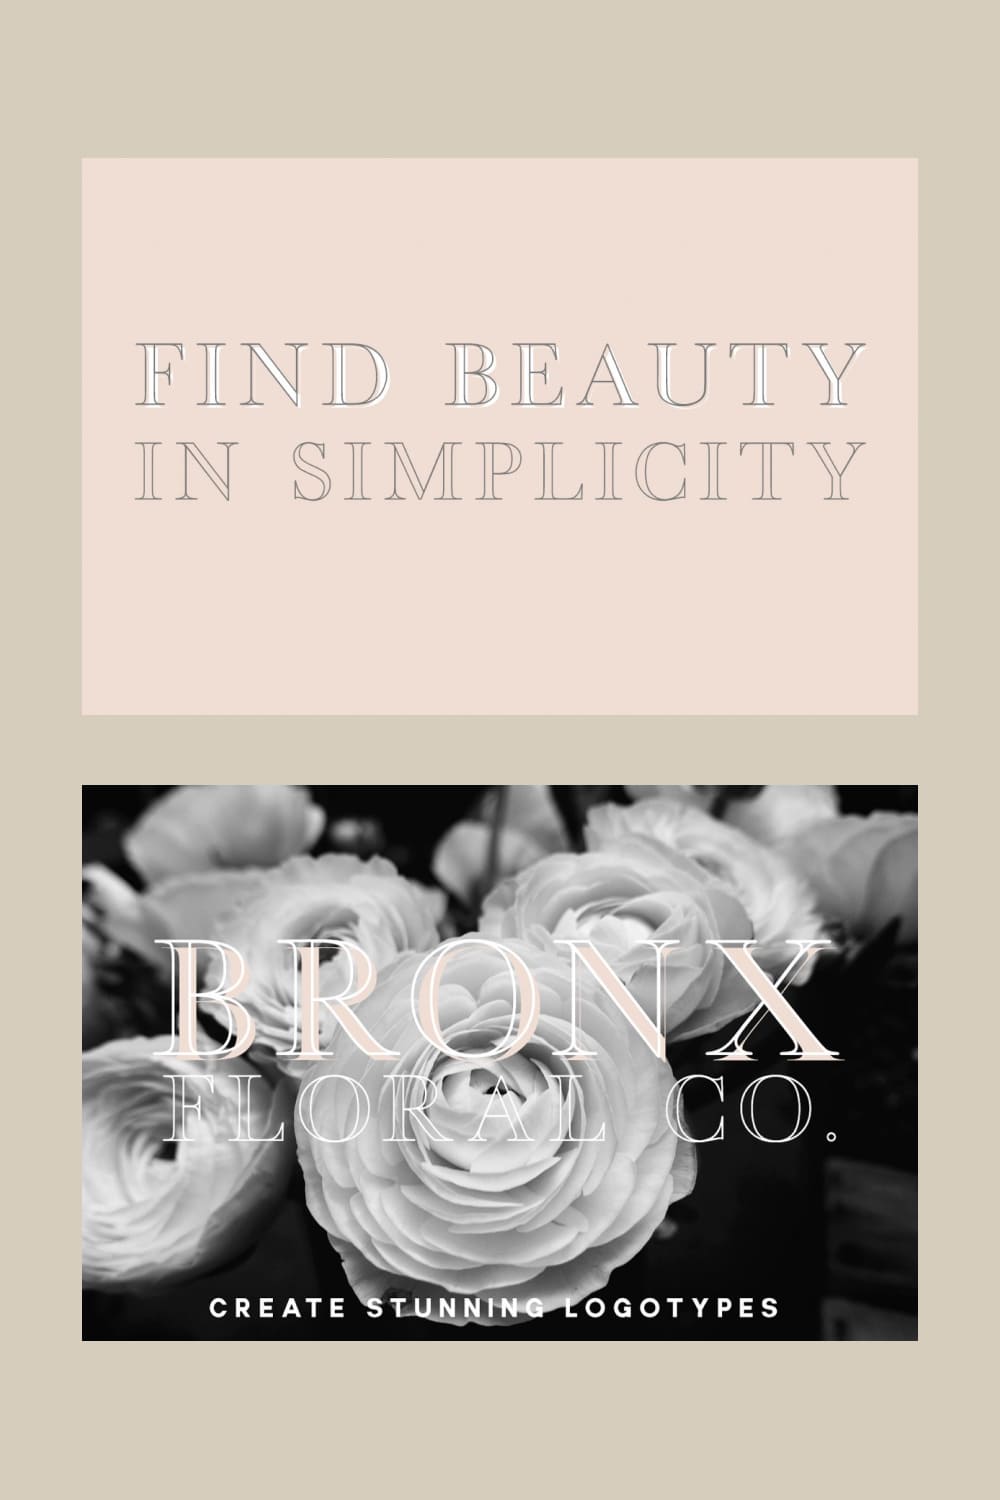 Bronx, An Extension For Manhattan By Jen Wagner Co - "Find Beauty In Simplicity".